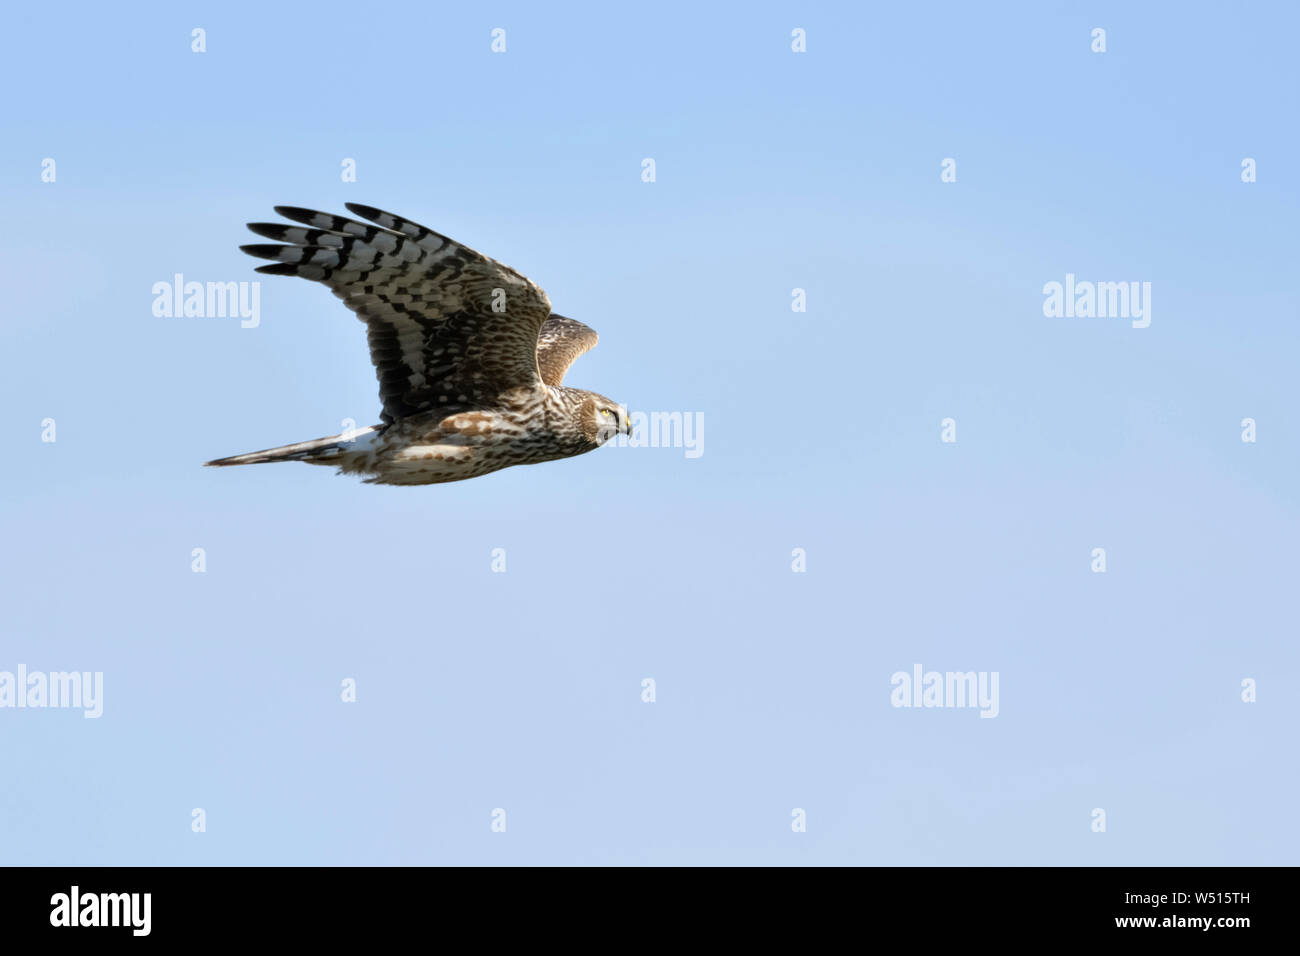 Hen Harrier / Kornweihe  ( Circus cyaneus ), adult female in flight, close by, detailed side view, blue sky, wildlife, Europe. Stock Photo